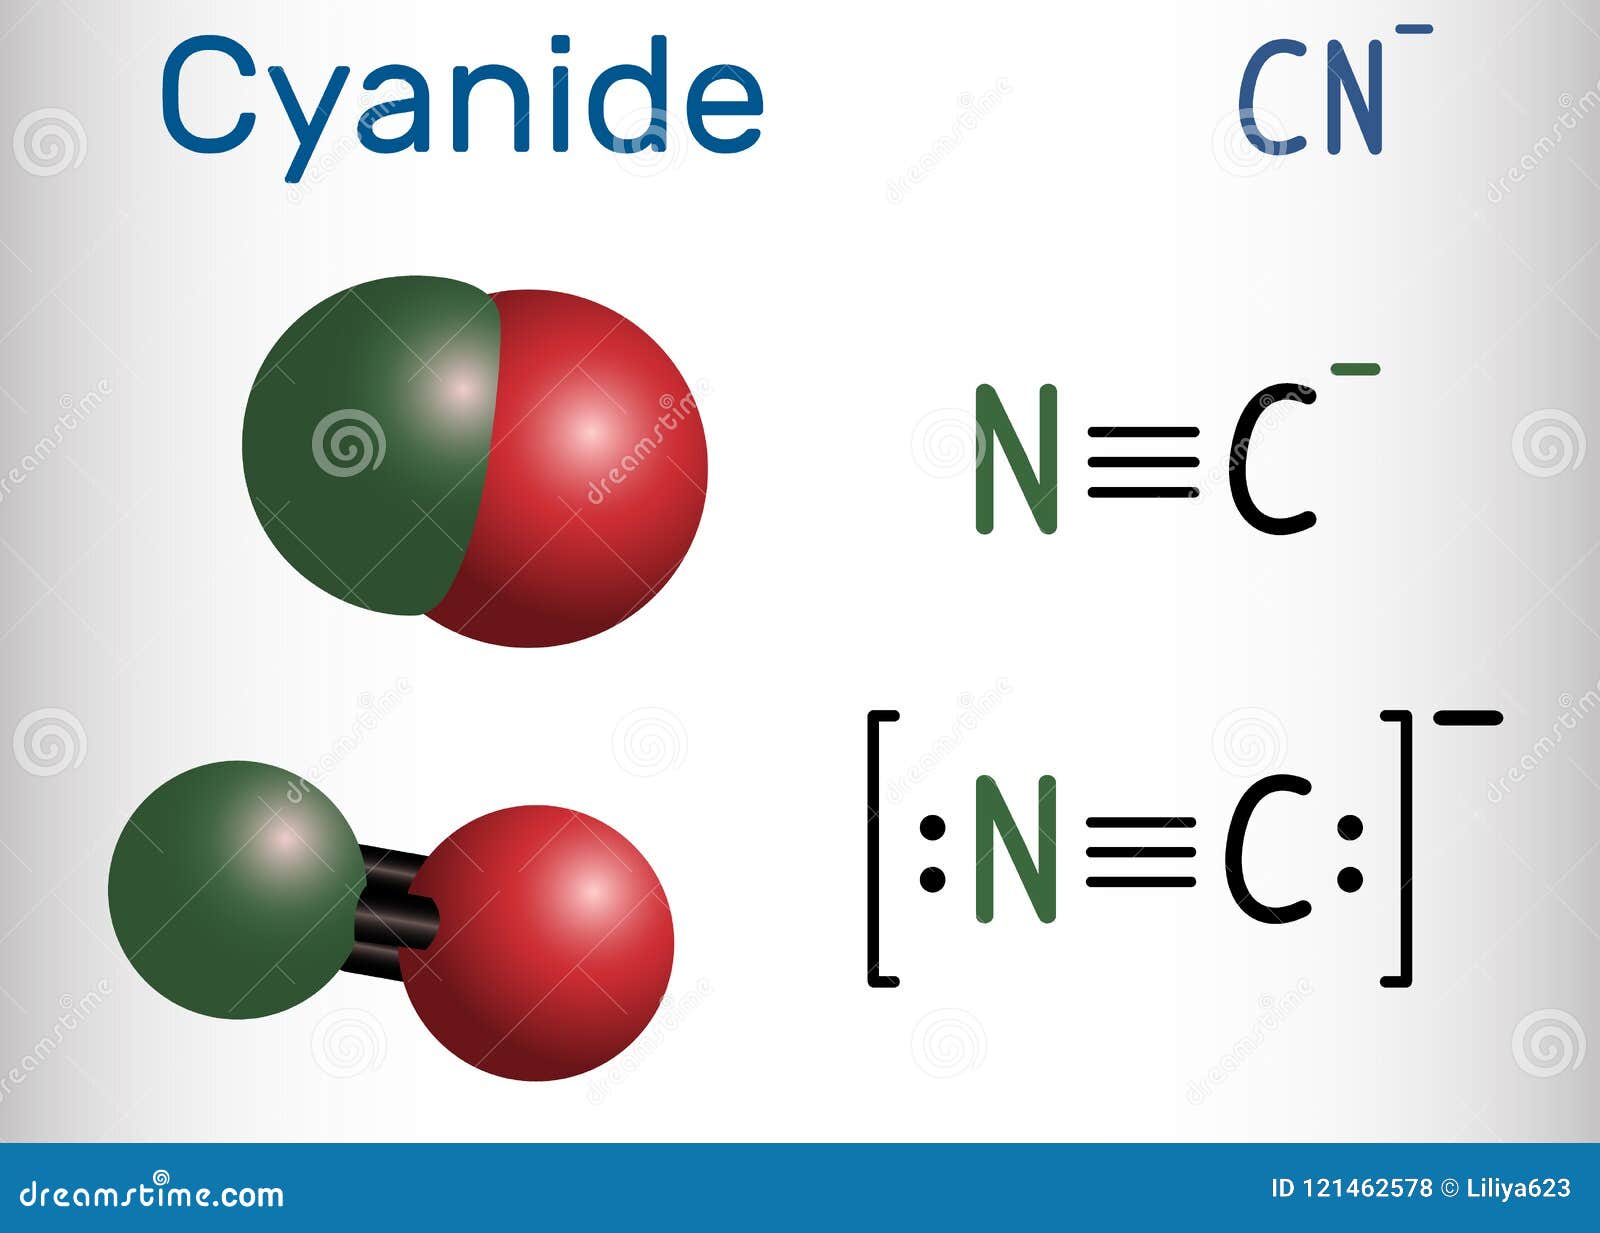 cyanide anion molecule. structural chemical formula and molecule